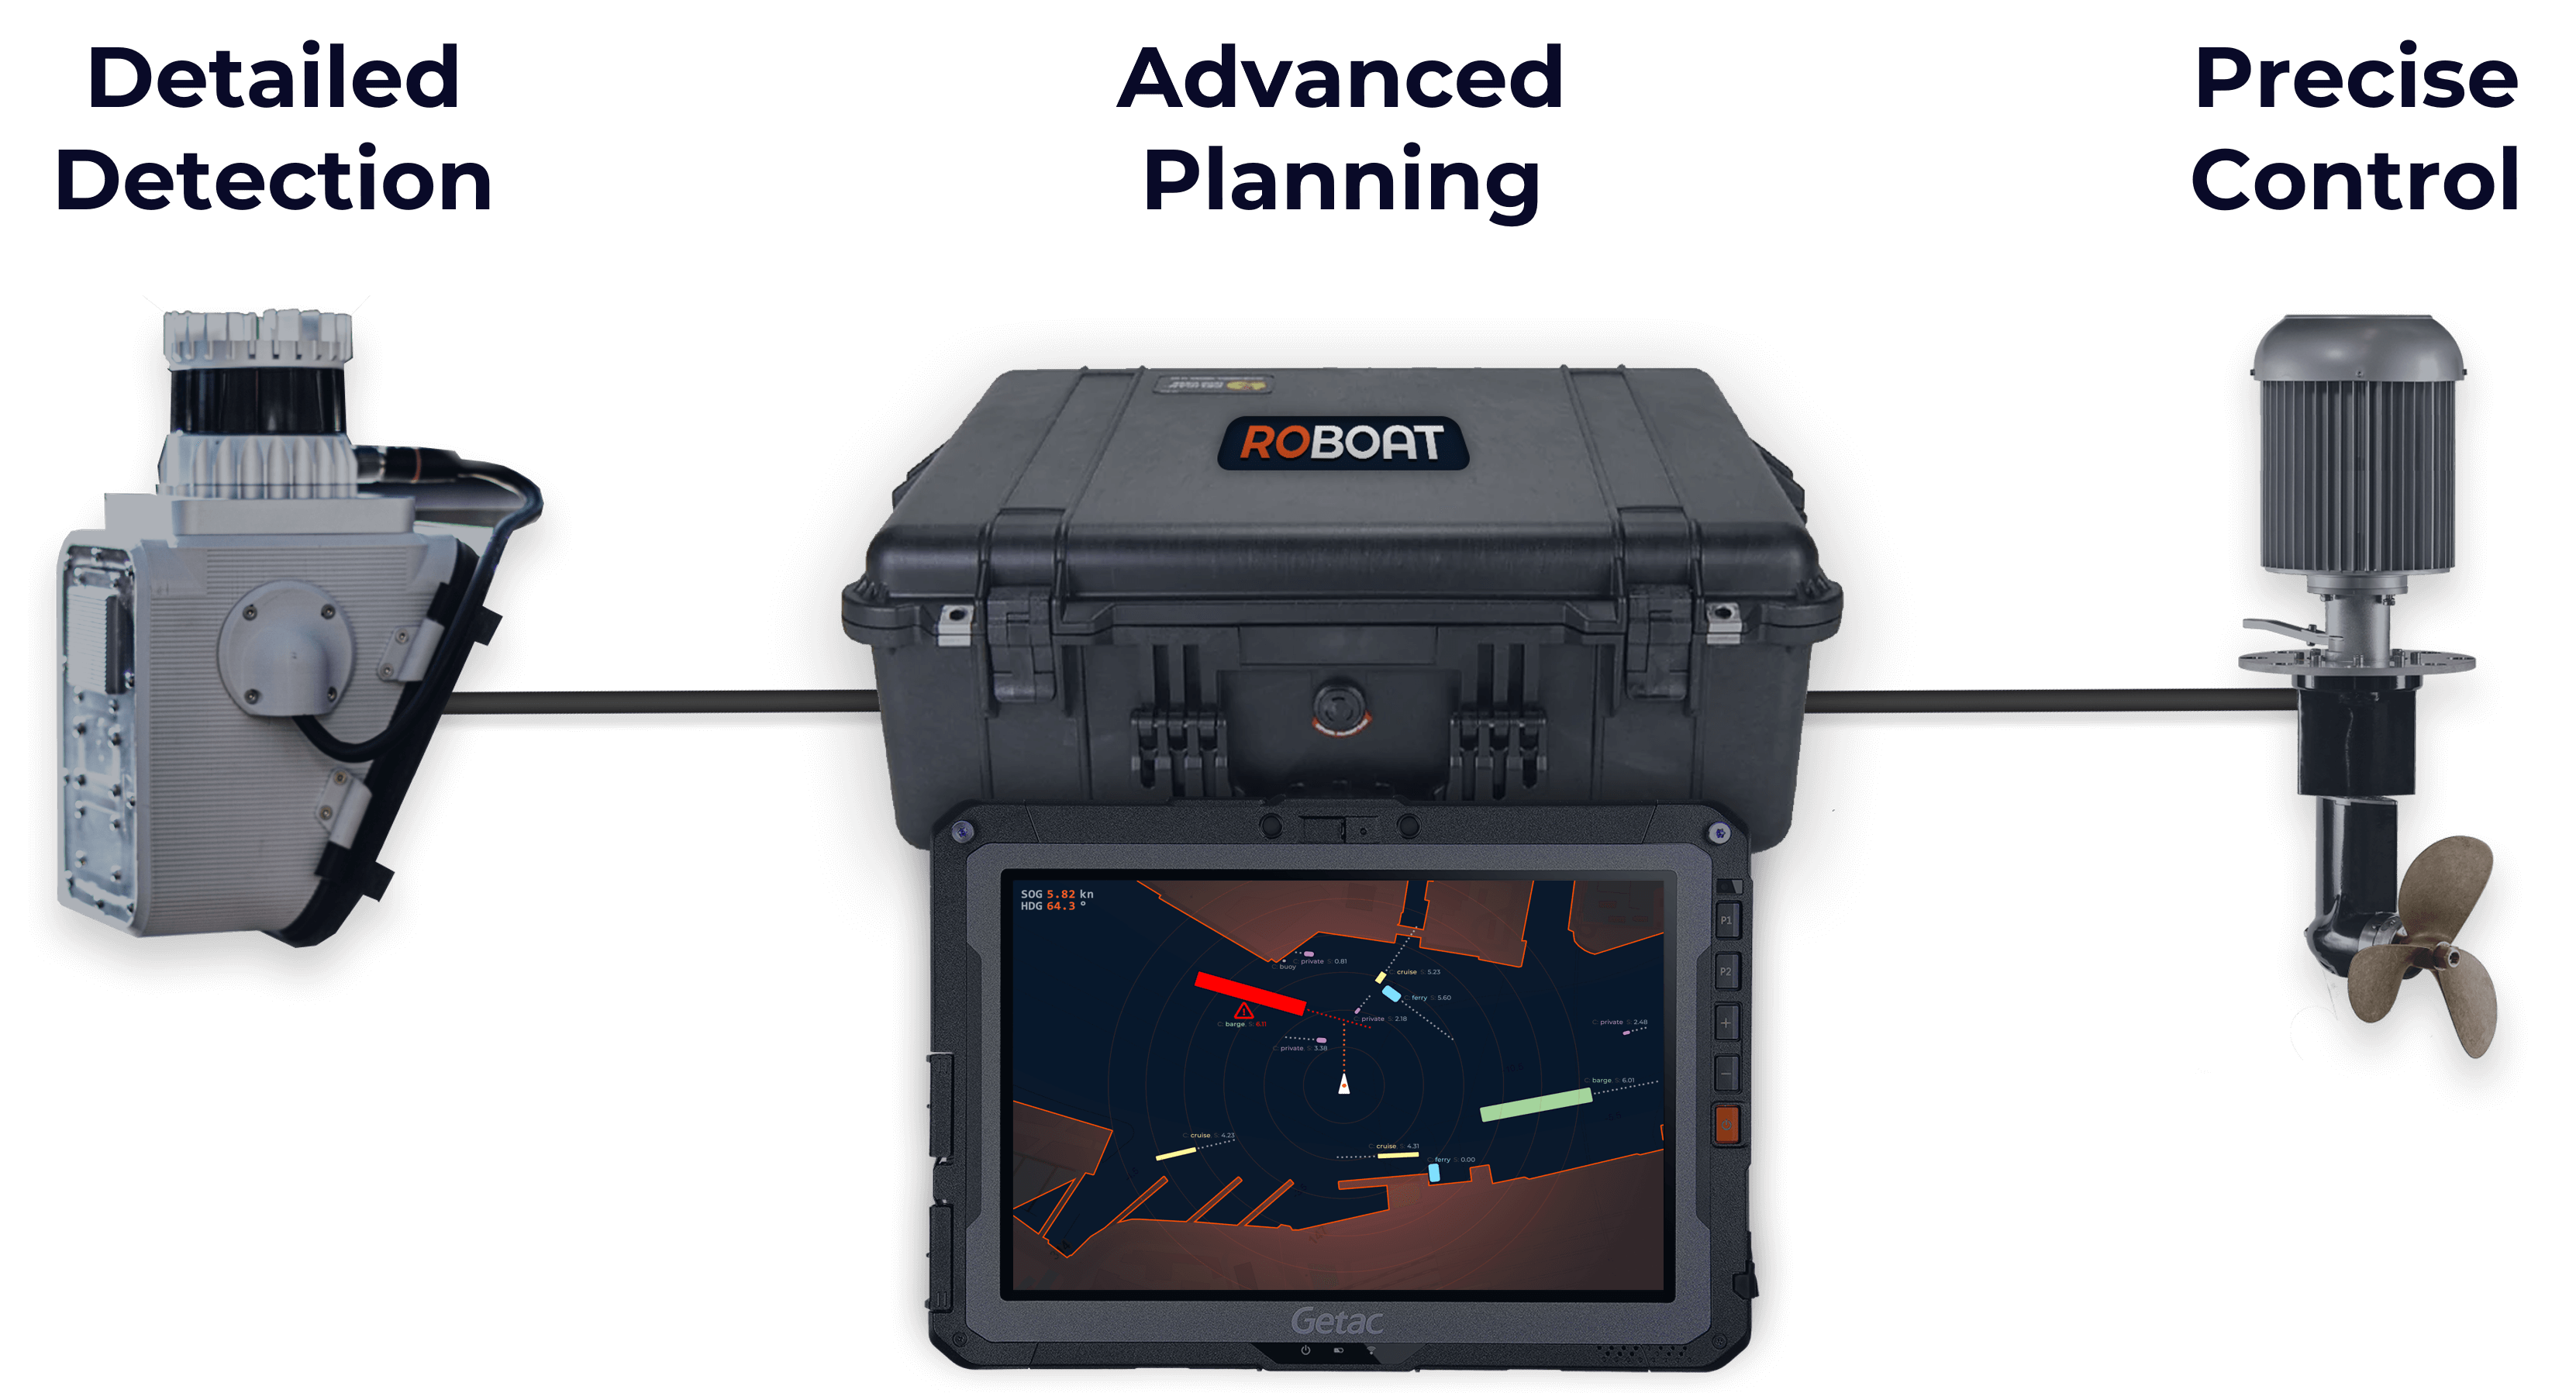 A global overview of the technology Roboat system consisting of the three key elements of Detection, Planning, and Control.